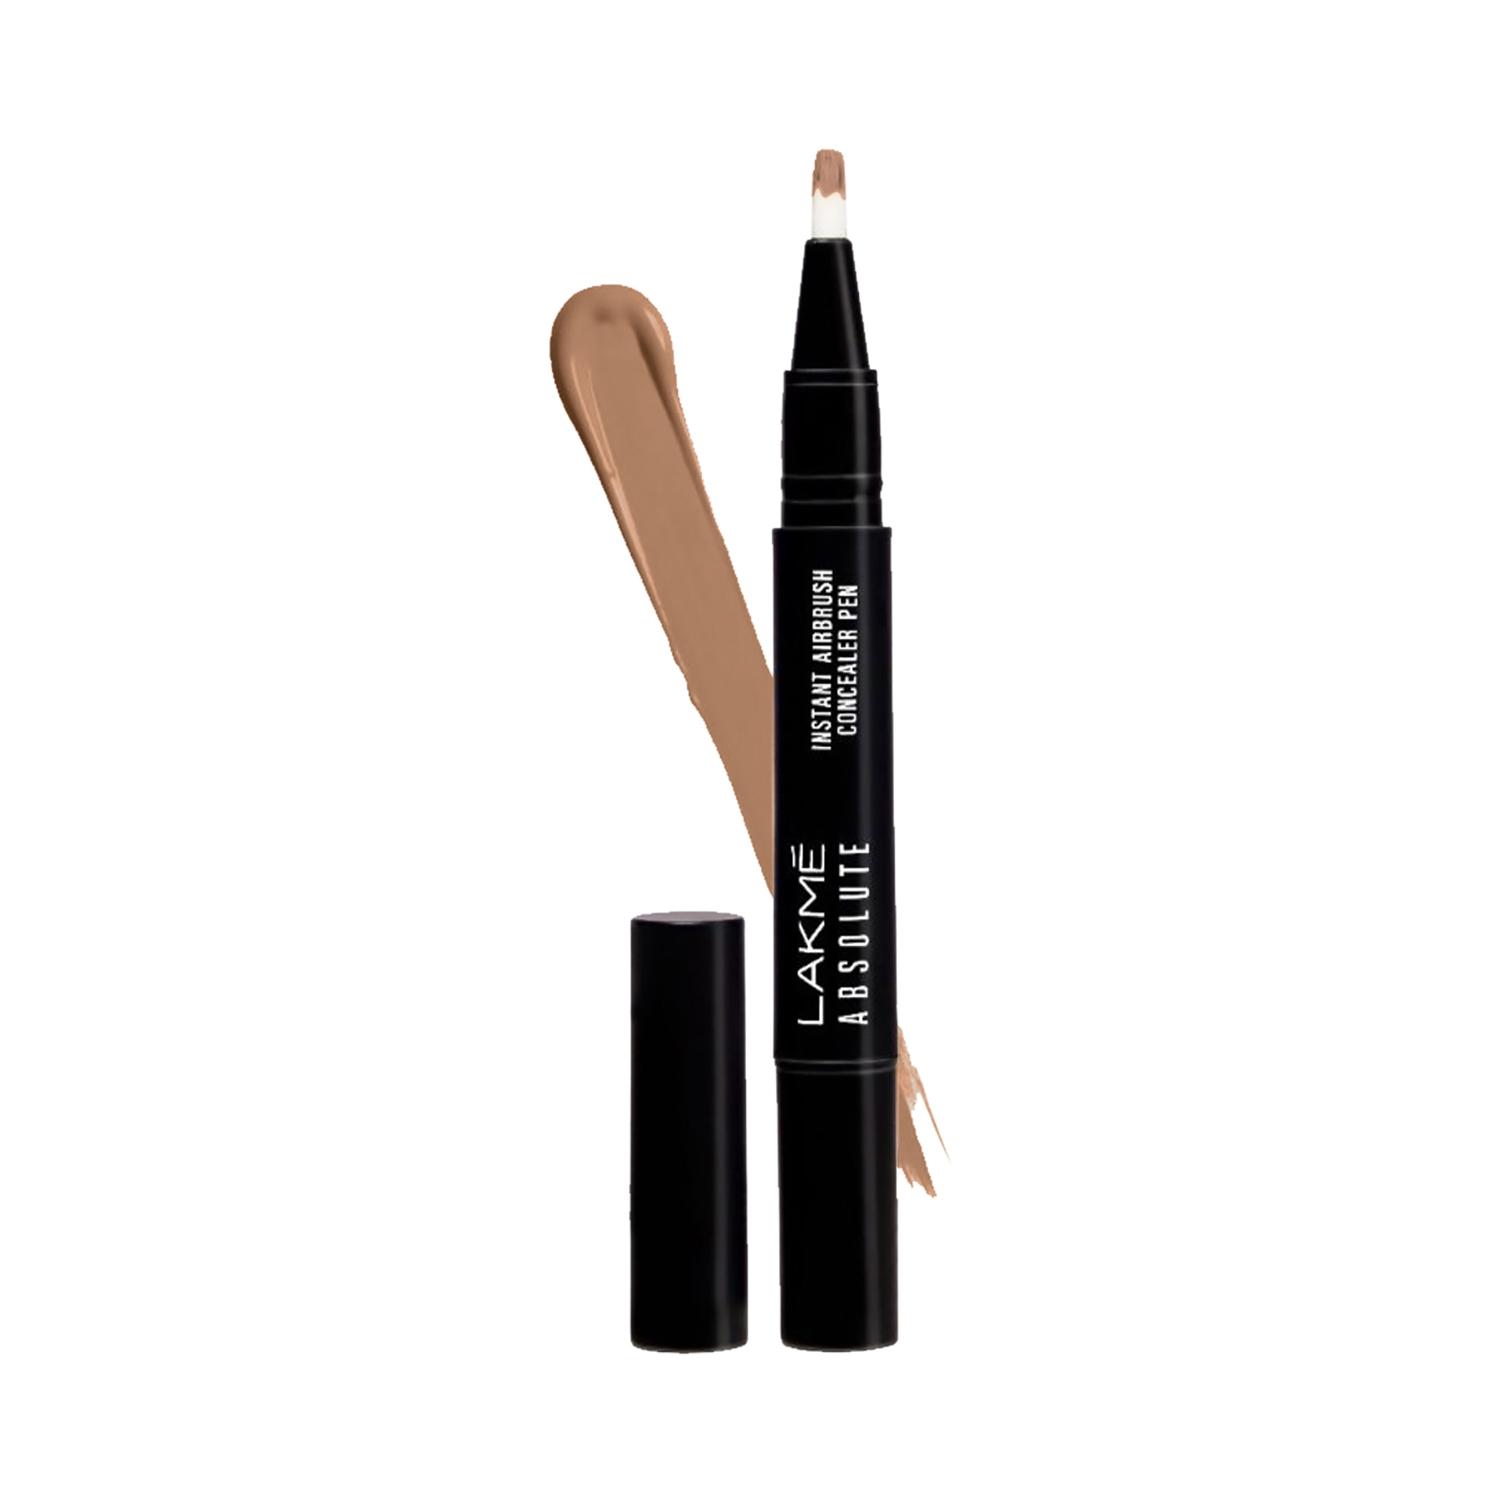 lakme absolute instant airbrush concealer pen - walnut (1.8g)